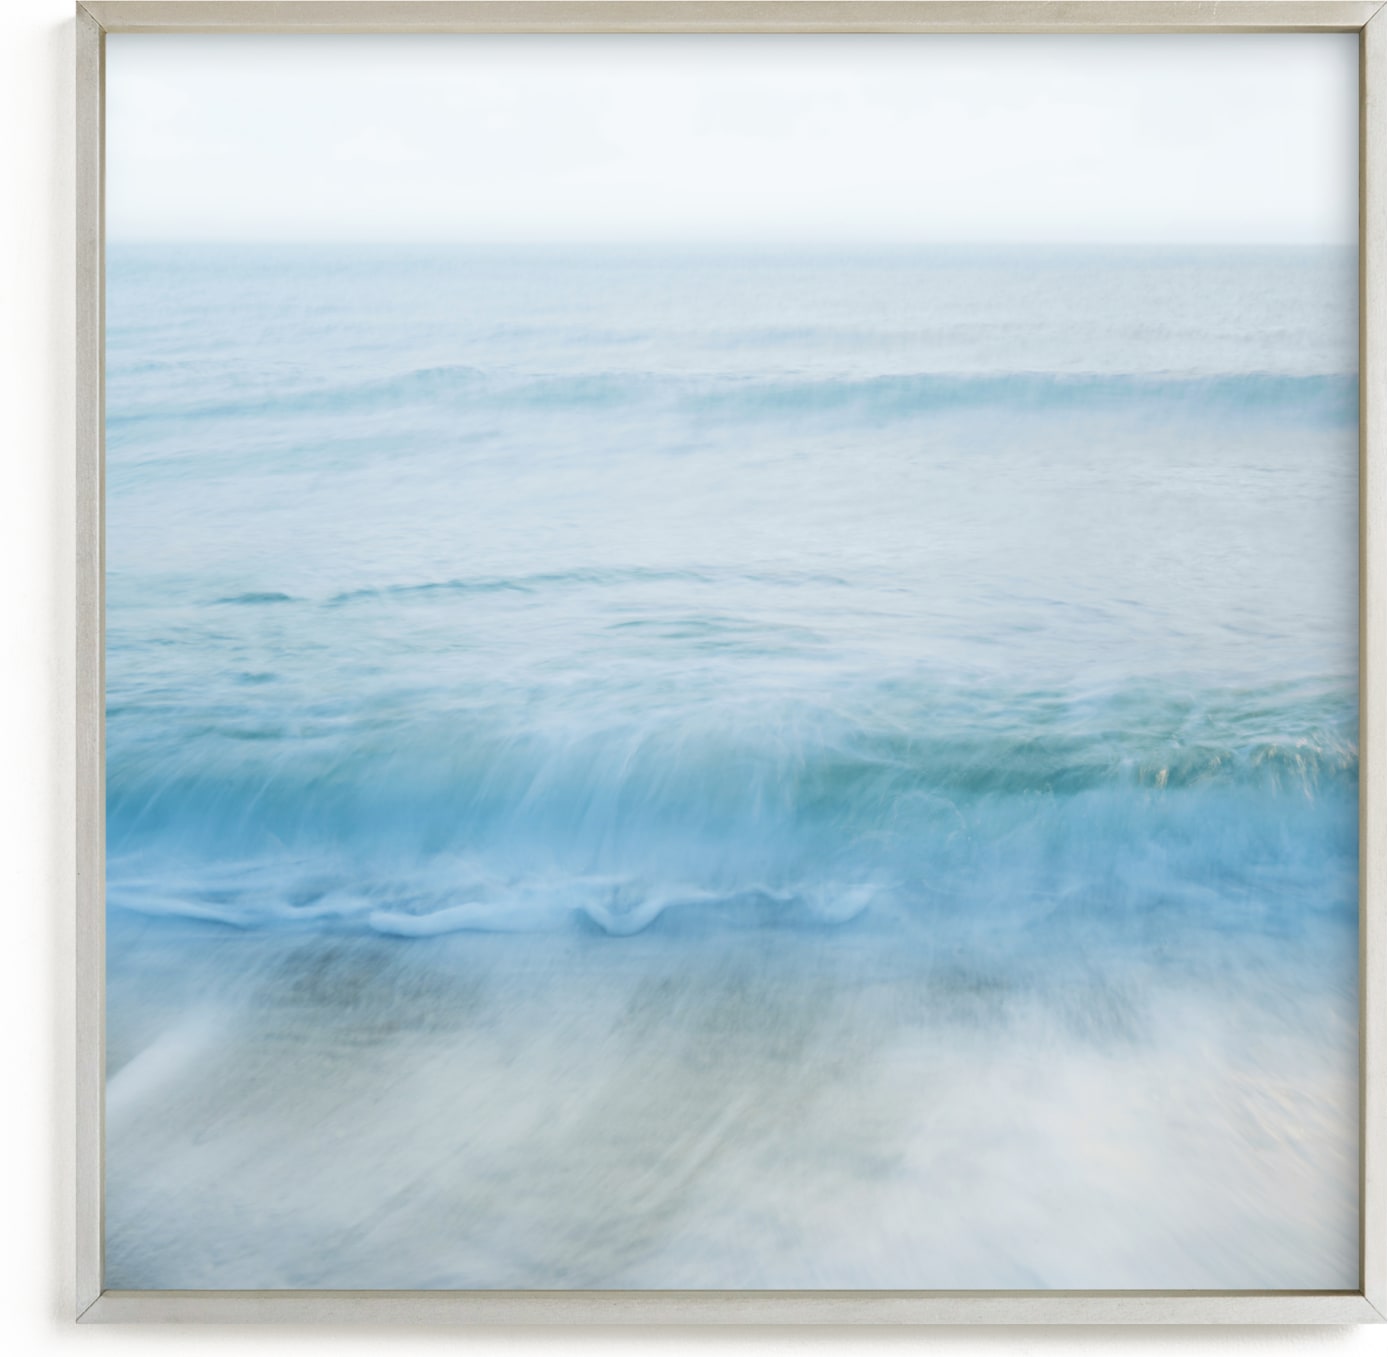 This is a blue art by Jacquelyn Sloane Siklos called Standing by the ocean, dreaming.